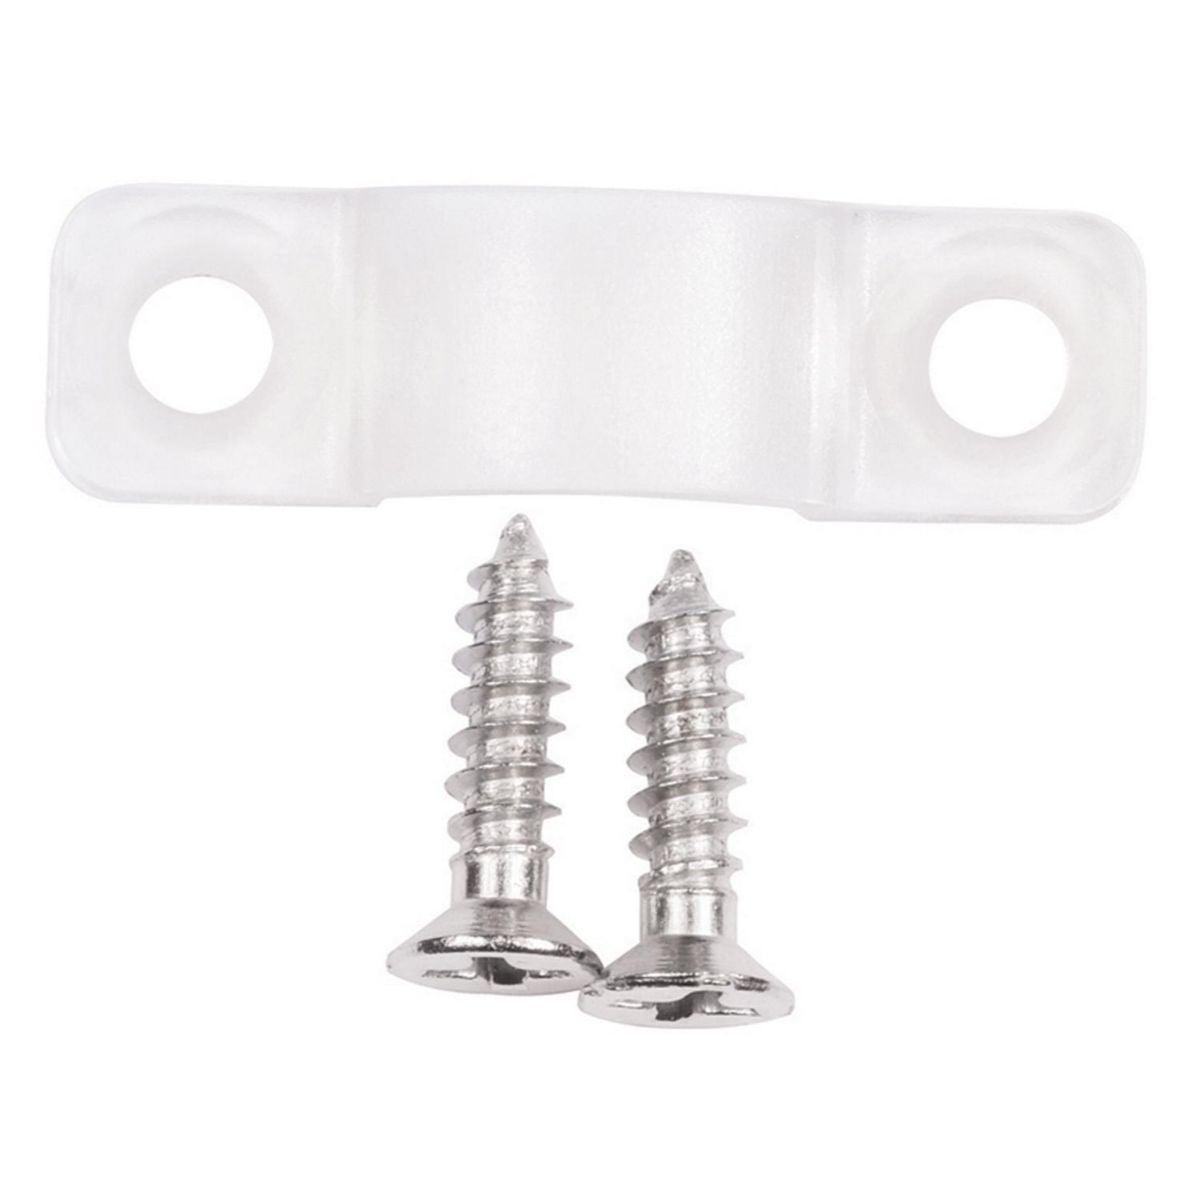 Clear Cord Clip with Screws for Elena Task Lighting, Pack of 4 - Bees Lighting